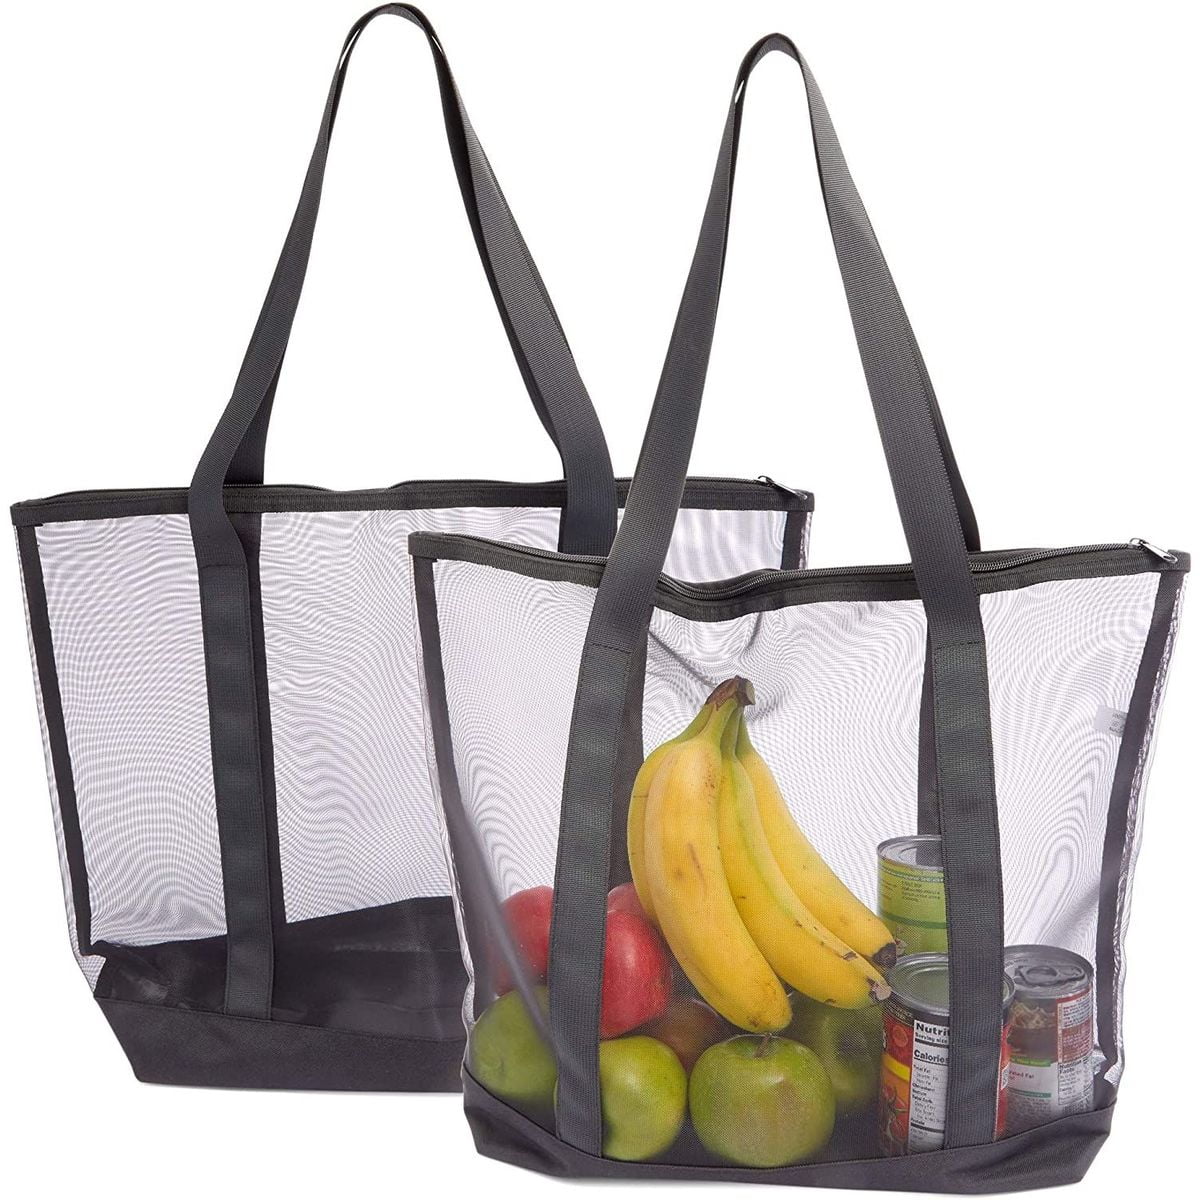 Large Big Reusable Grocery Shopping Bags Totes Pocket Zippered Gym Travel 19" 